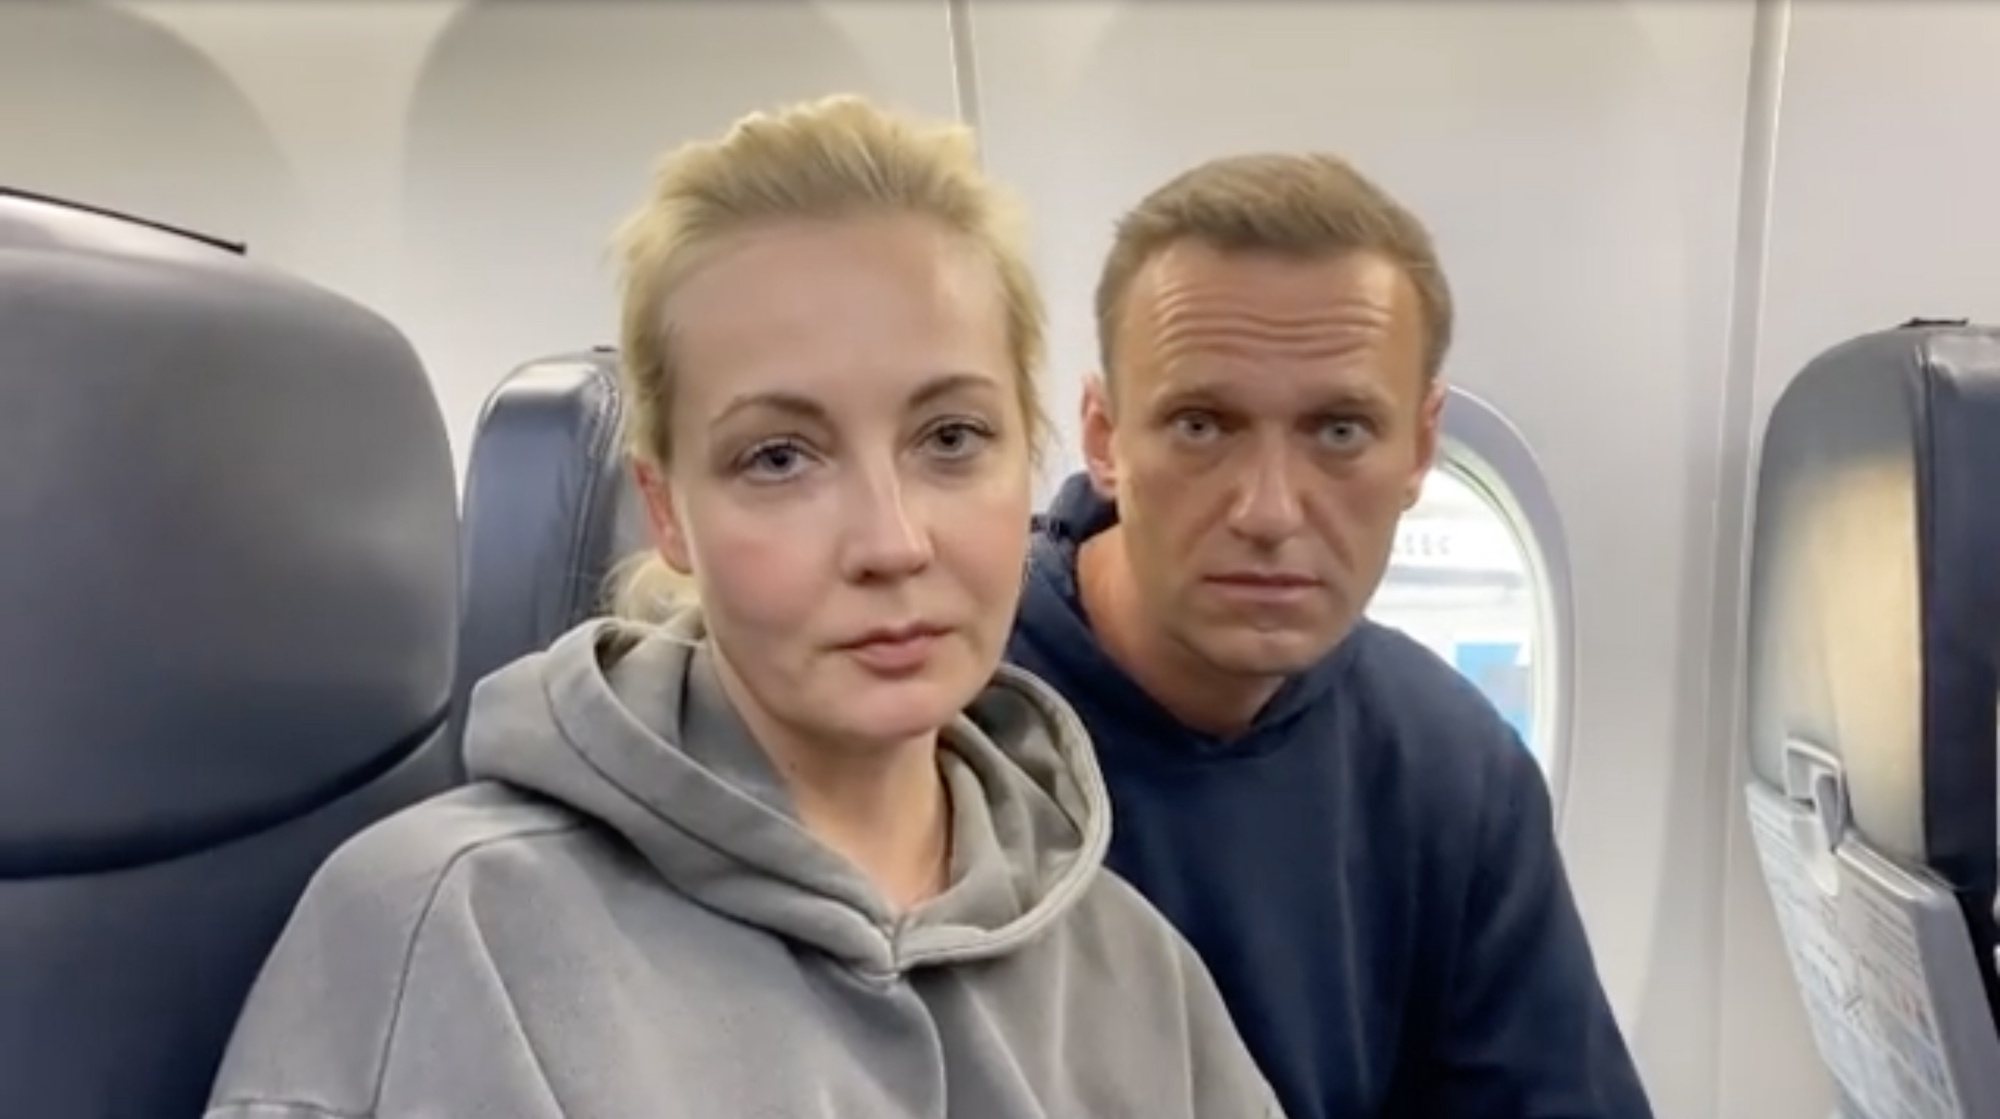 epa08959647 A frame grab of Alexei Navalny and Yulia Navalnaya taken from a video posted on the Instagram account @navalny shows Russian opposition Leader Alexei Navalny before his flight at the Berlin Brandenburg International Airport BER in Schoenefeld, Germany, 17 January 2021 (reissued 23 January 2021). Yulia Navalnaya, wife of Russian opposition leader Alexei Navalny, said 23 January 2021 she has been arrested by police during the protests in Moscow, Russia.  EPA/ALEXEI NAVALNY INSTAGRAM *** Local Caption *** 56625894